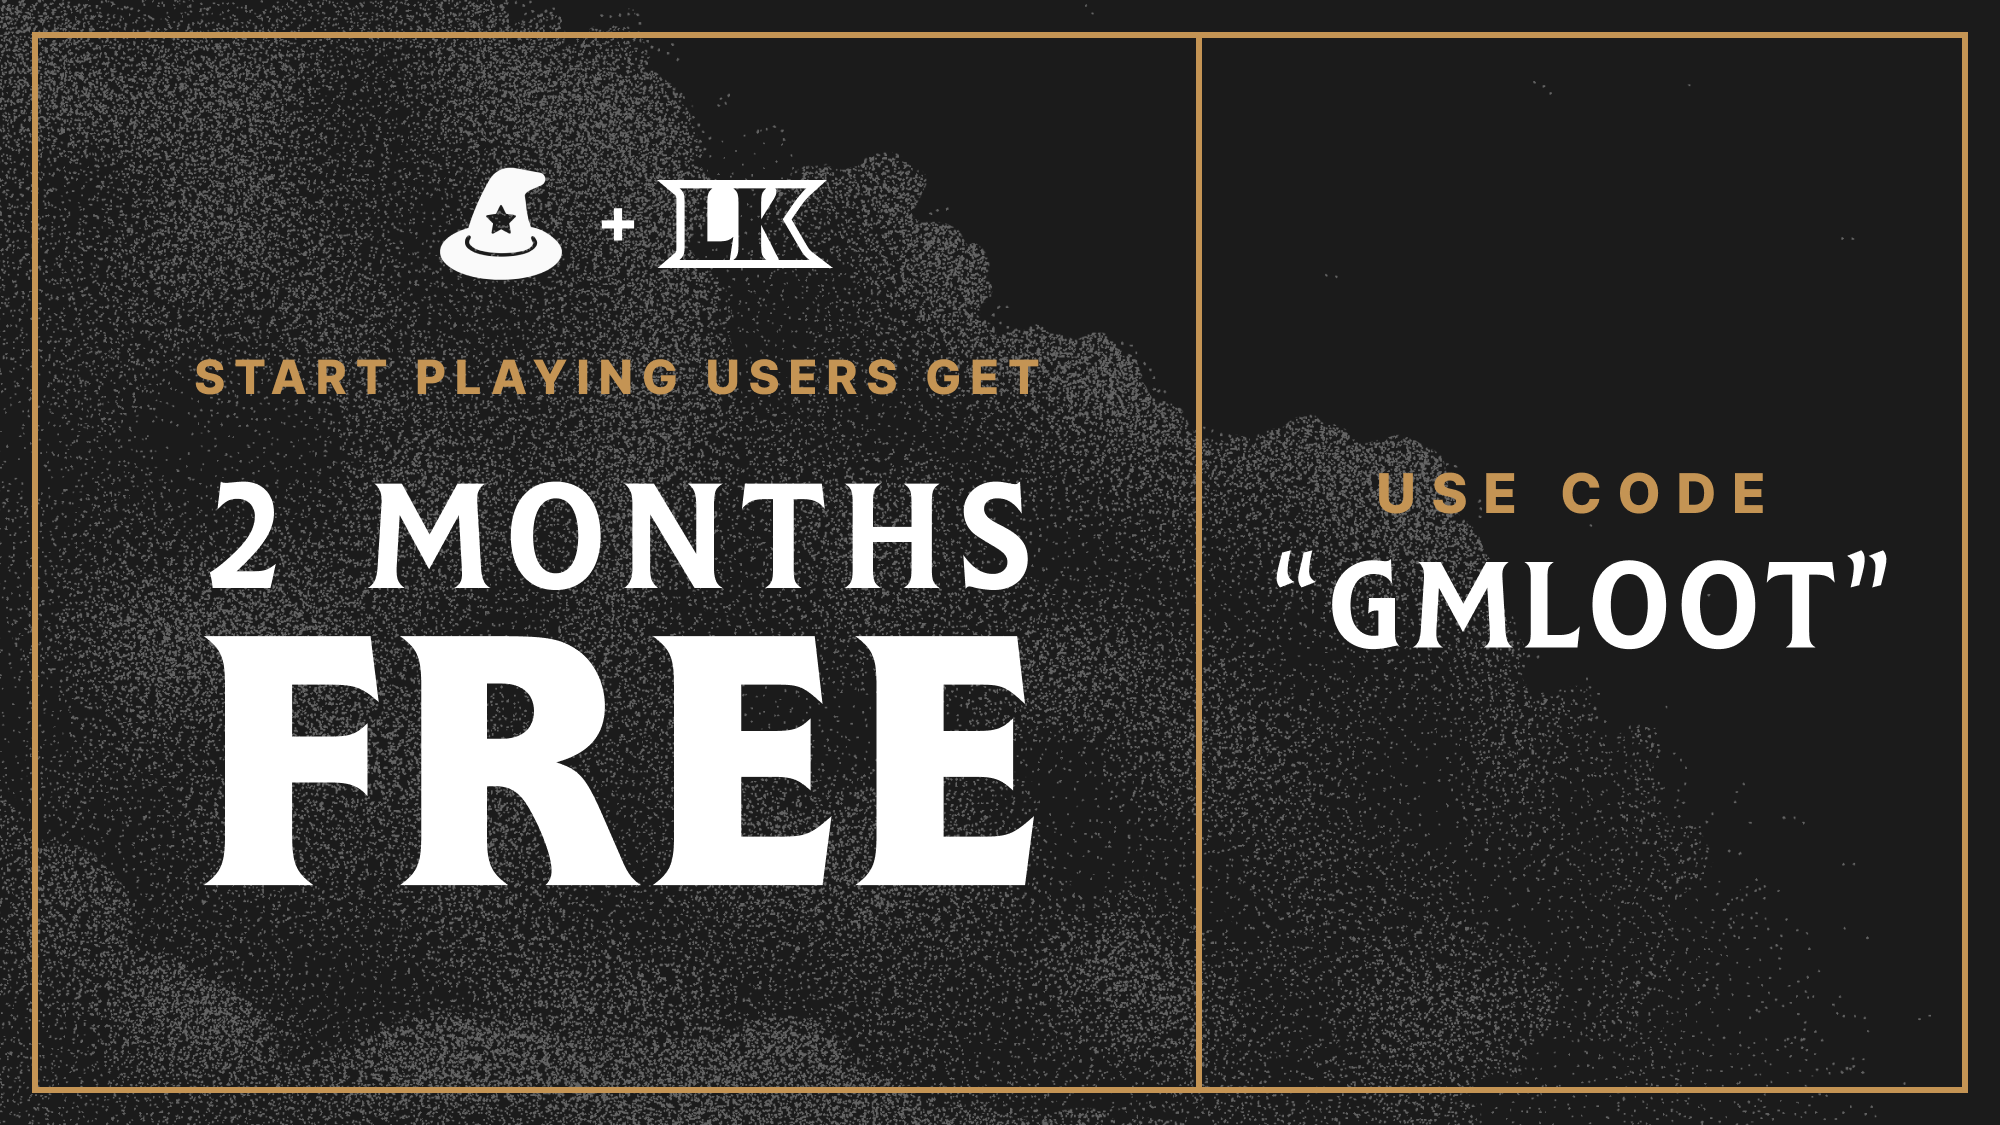 Use code GMLOOT at signup for two months free. Coupon code only applies to new LK accounts.